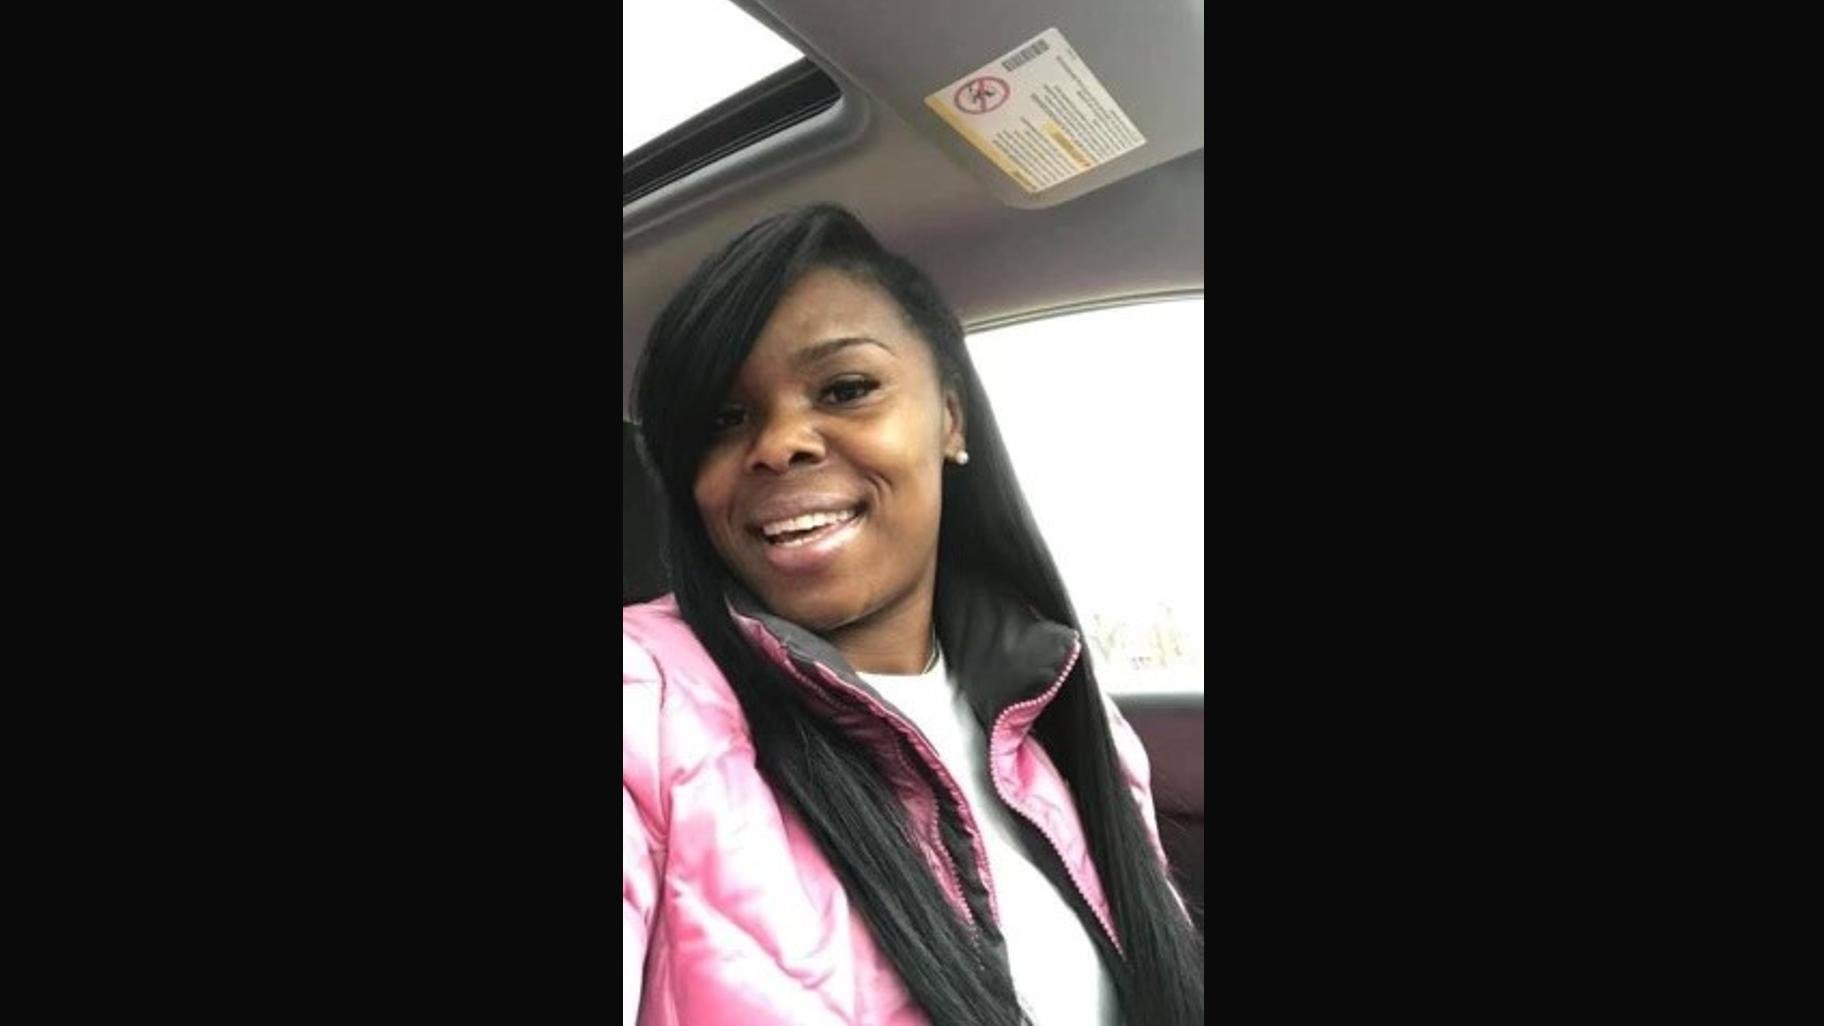 Chereatha Morrison has been missing since 2021. (Submitted)